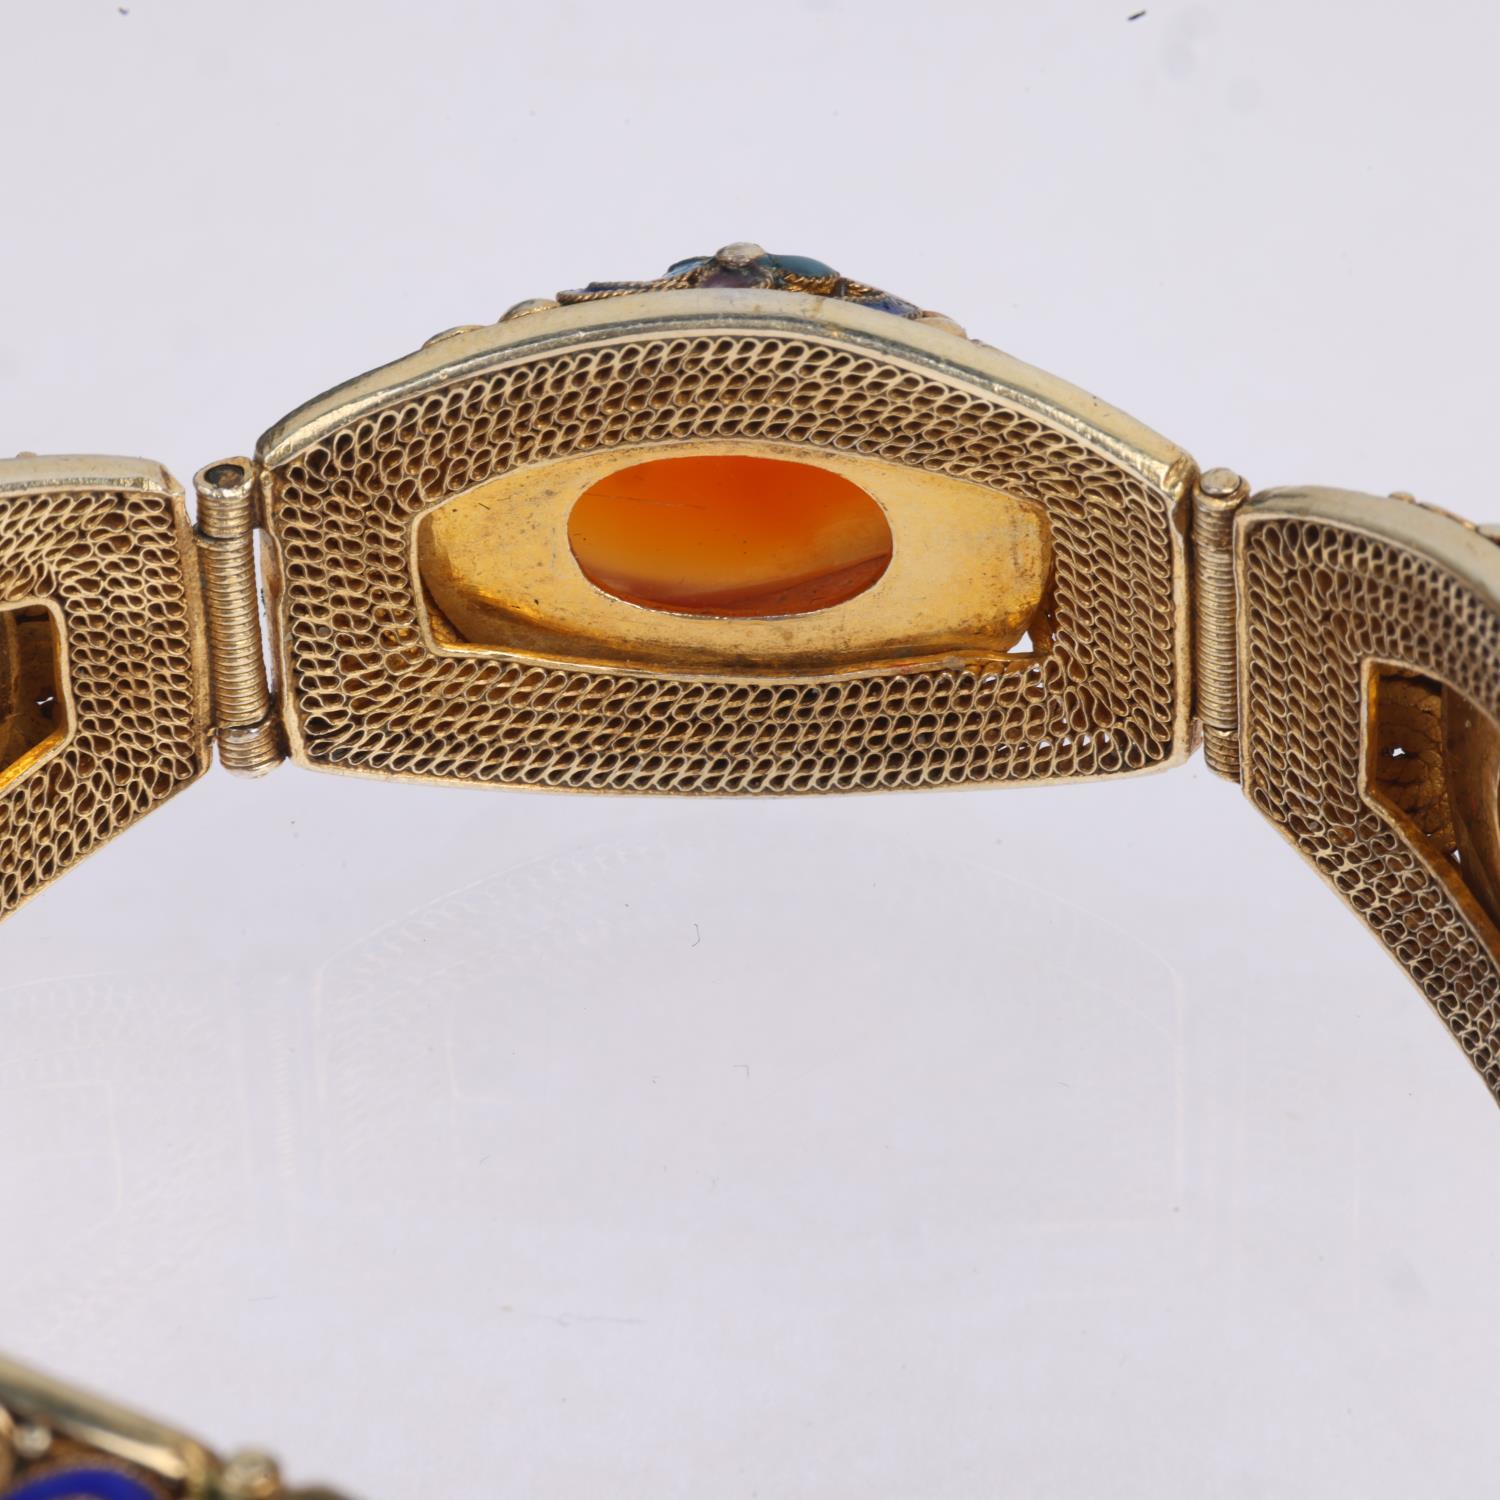 A Chinese silver-gilt carnelian and enamel panel bracelet, band width 19.5mm, internal circumference - Image 3 of 3